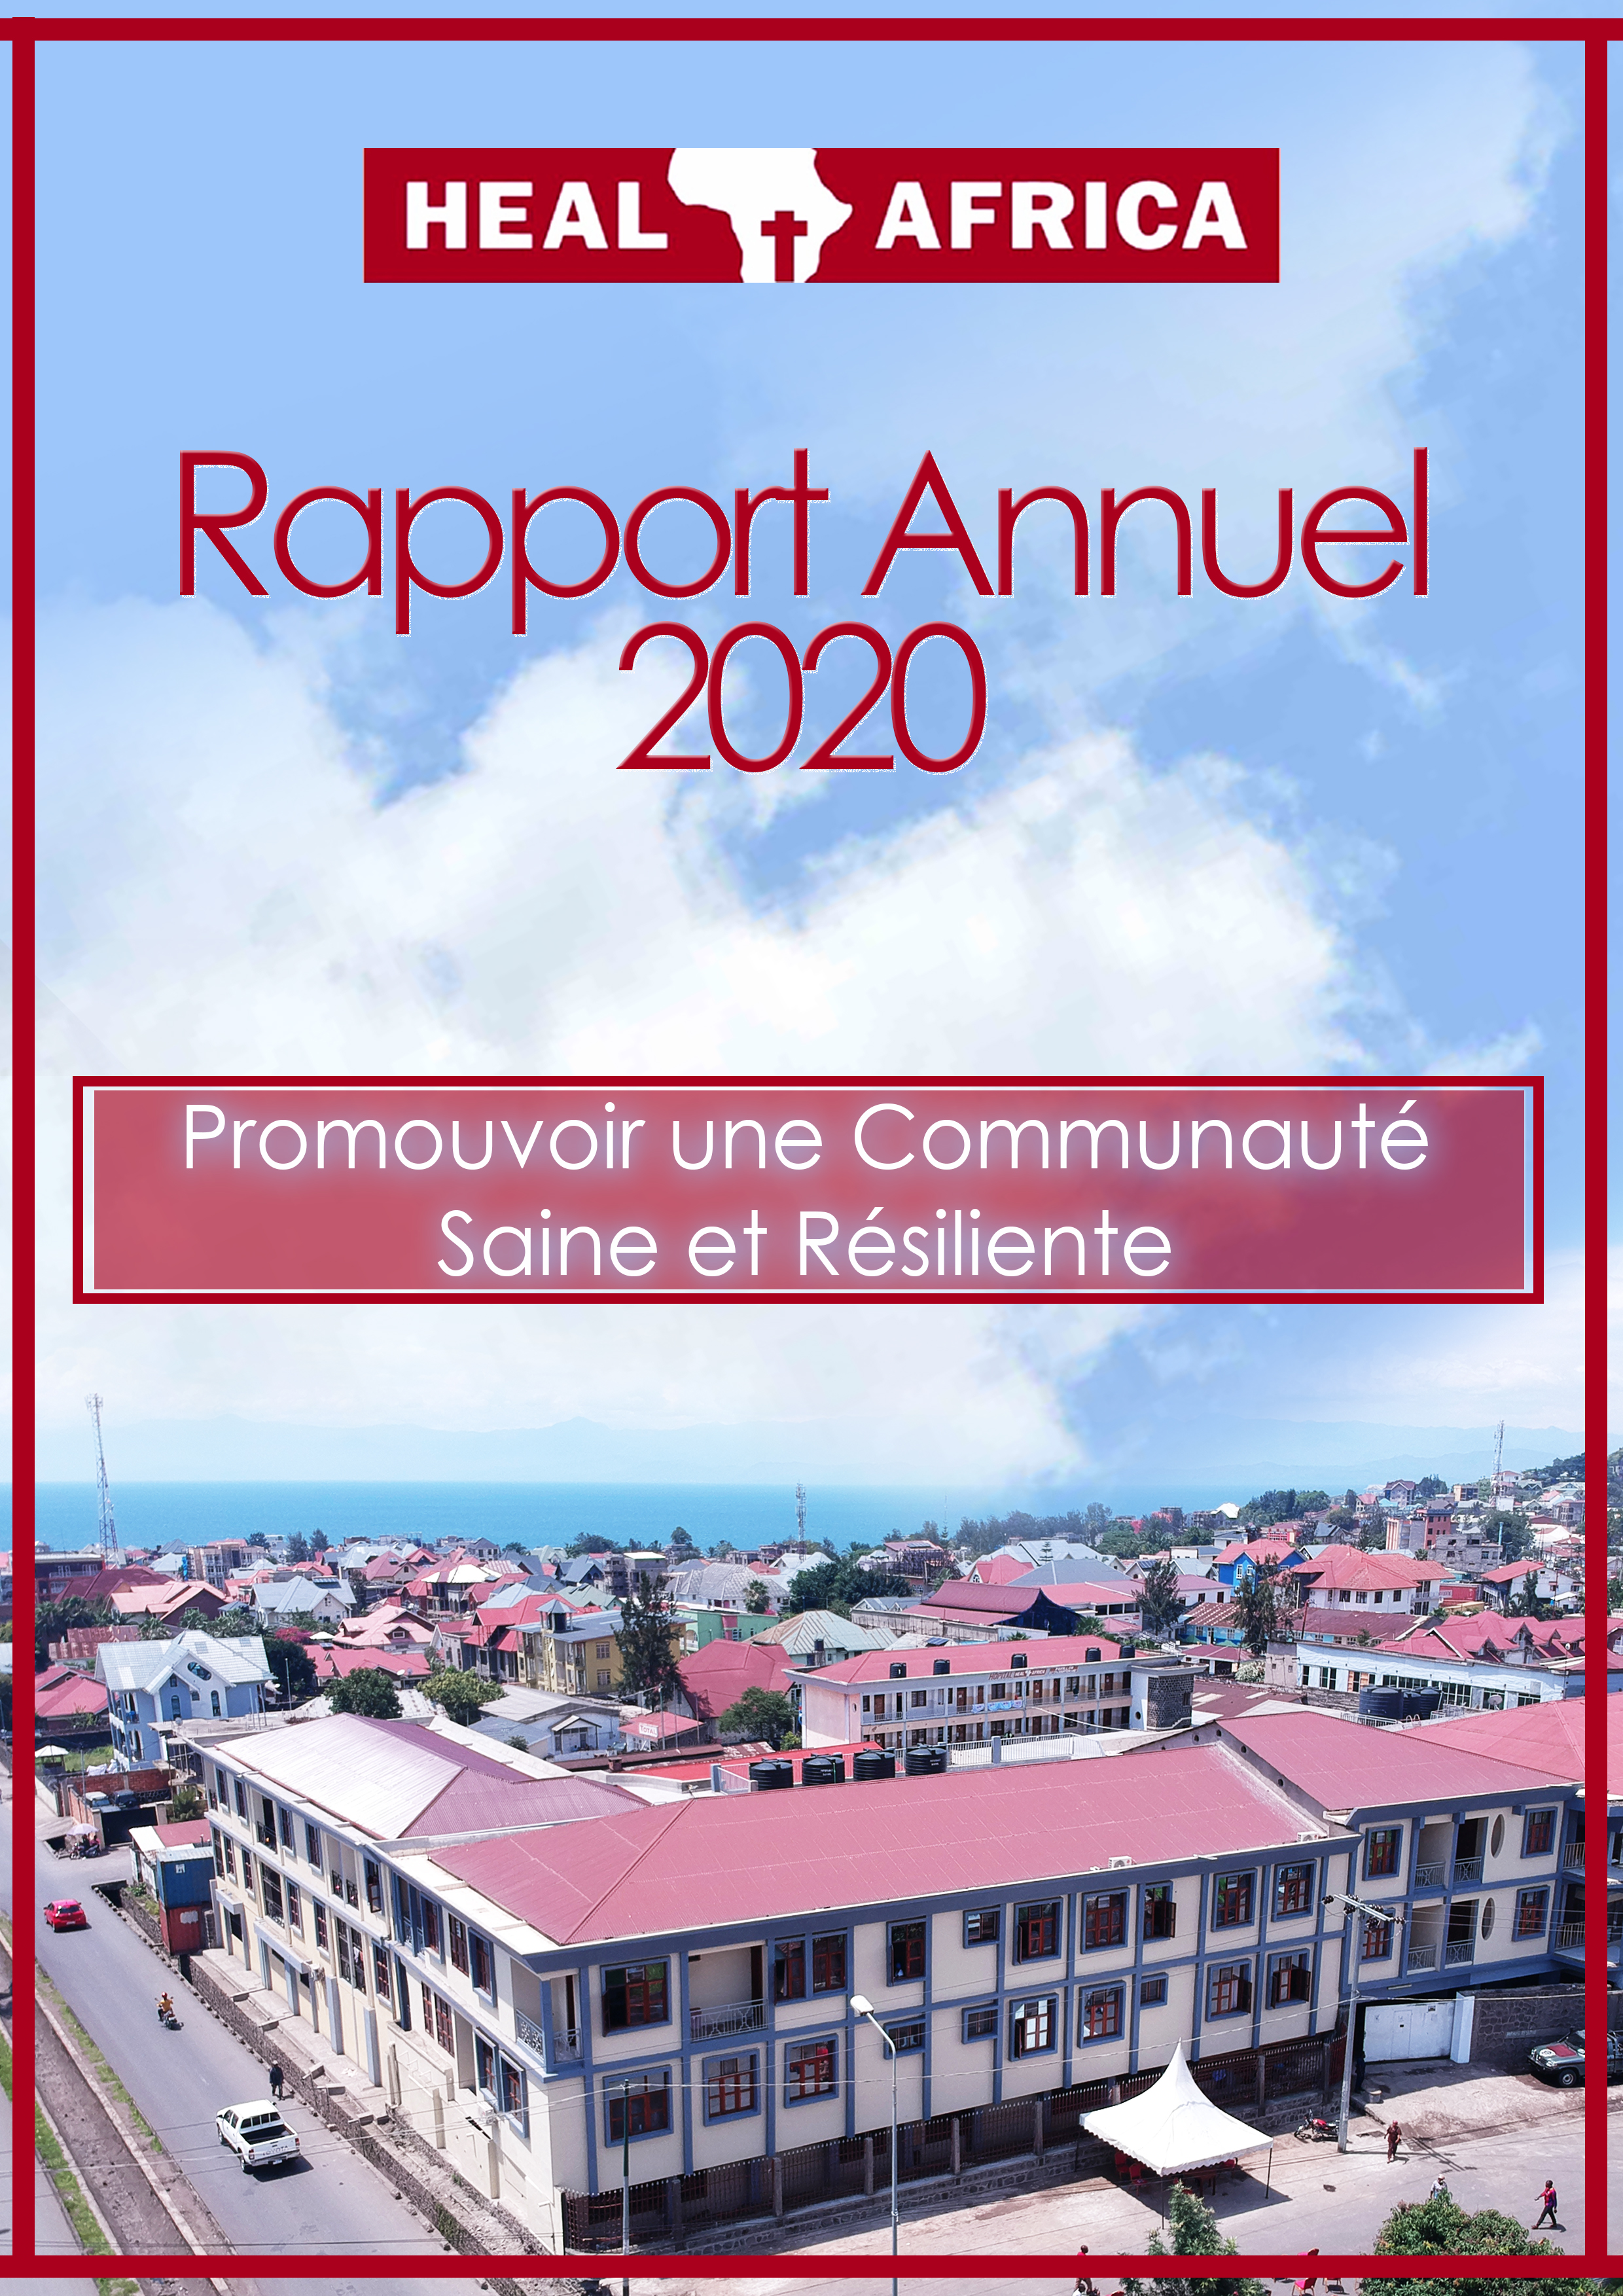 Rapport Annuel 2020 -HEAL Africa